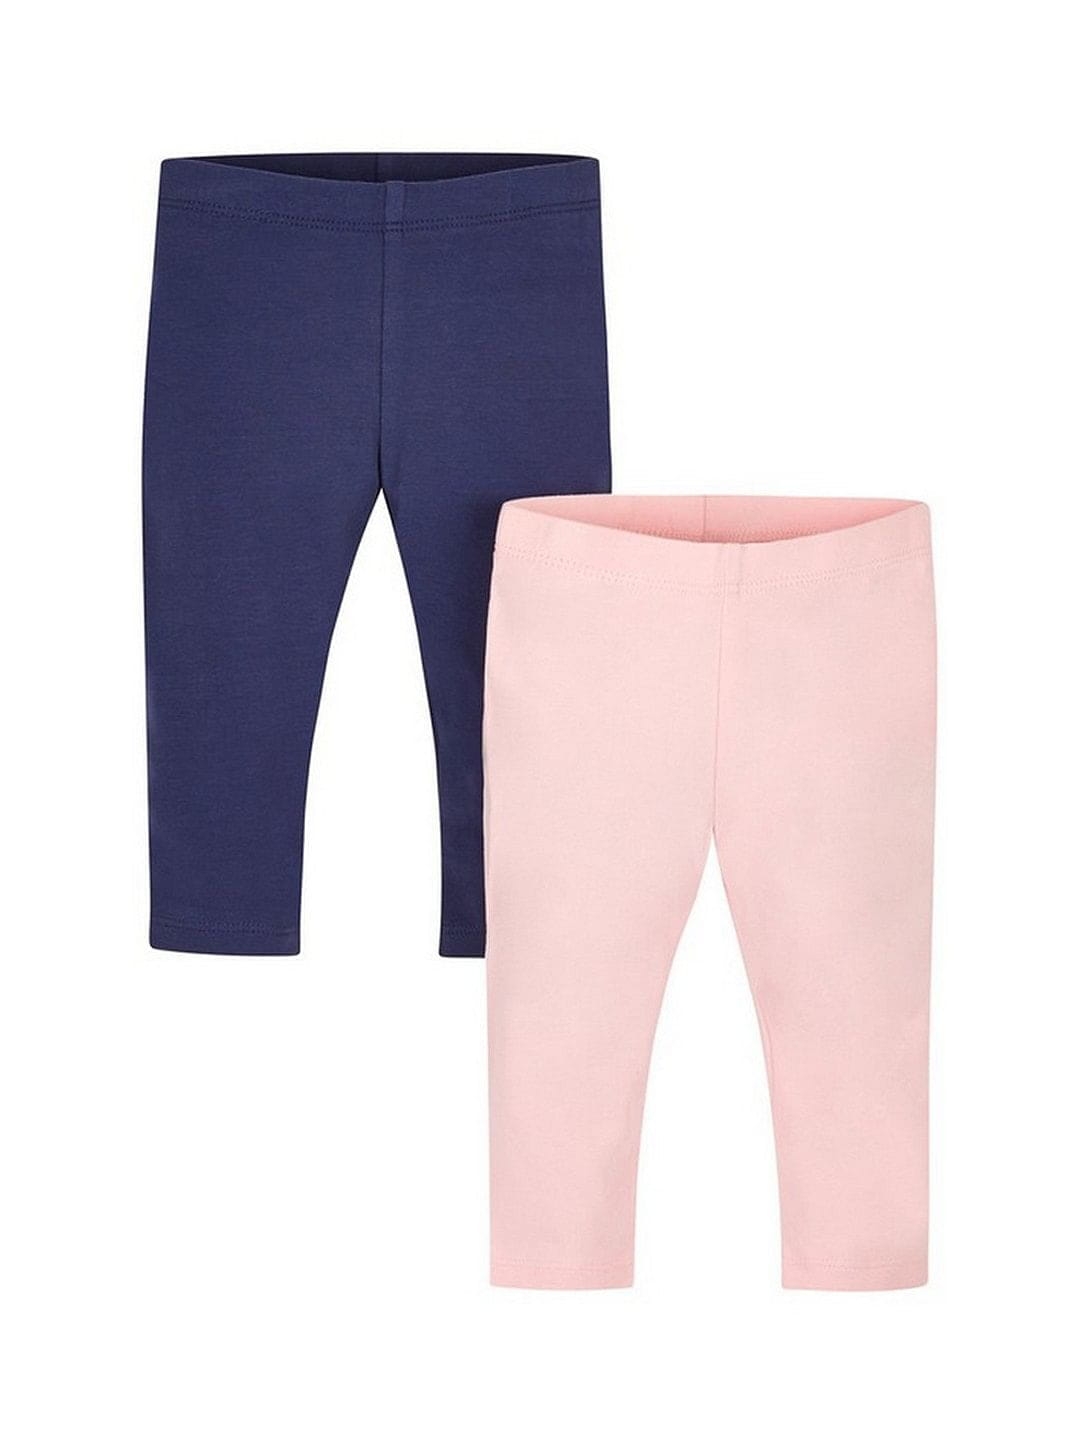 Mothercare | Pale Pink and Navy Printed Leggings - Pack of 2 0